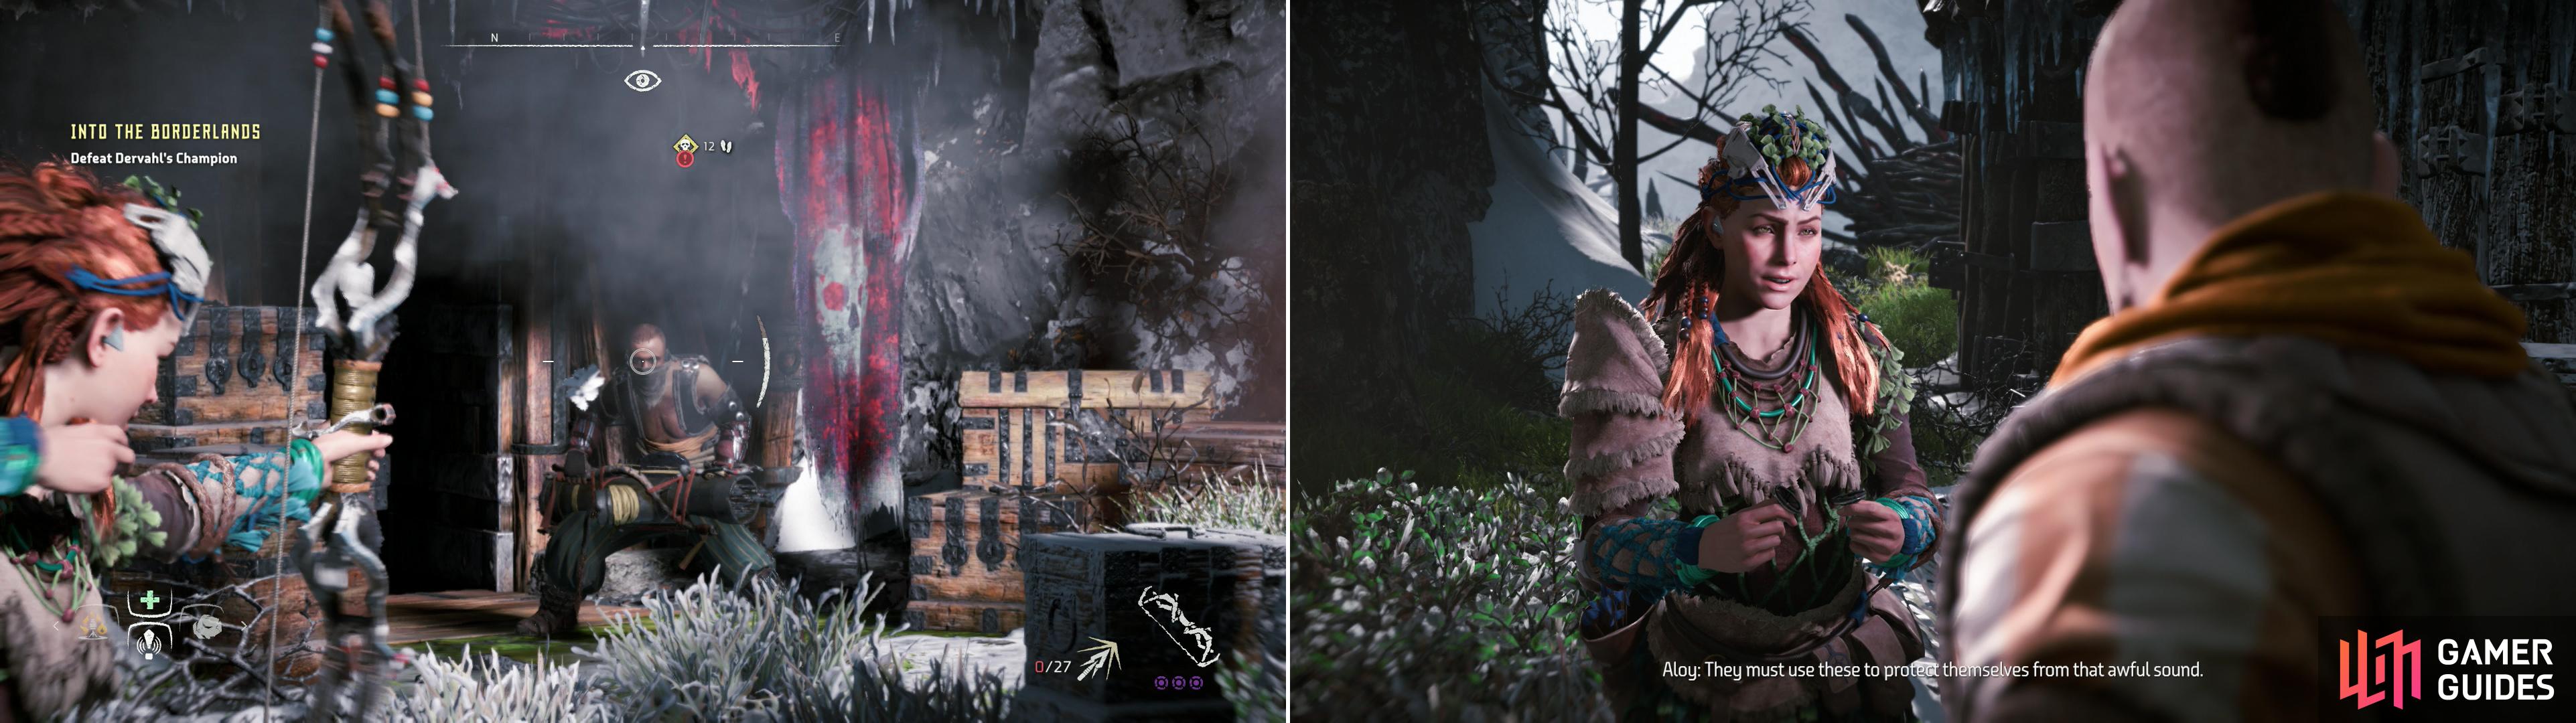 Defeat the heavily-armed mercenary that occupied Dervahl’s lair (left) after which Aloy will claim the devices that protected him from Dervahl’s sonic device (right).